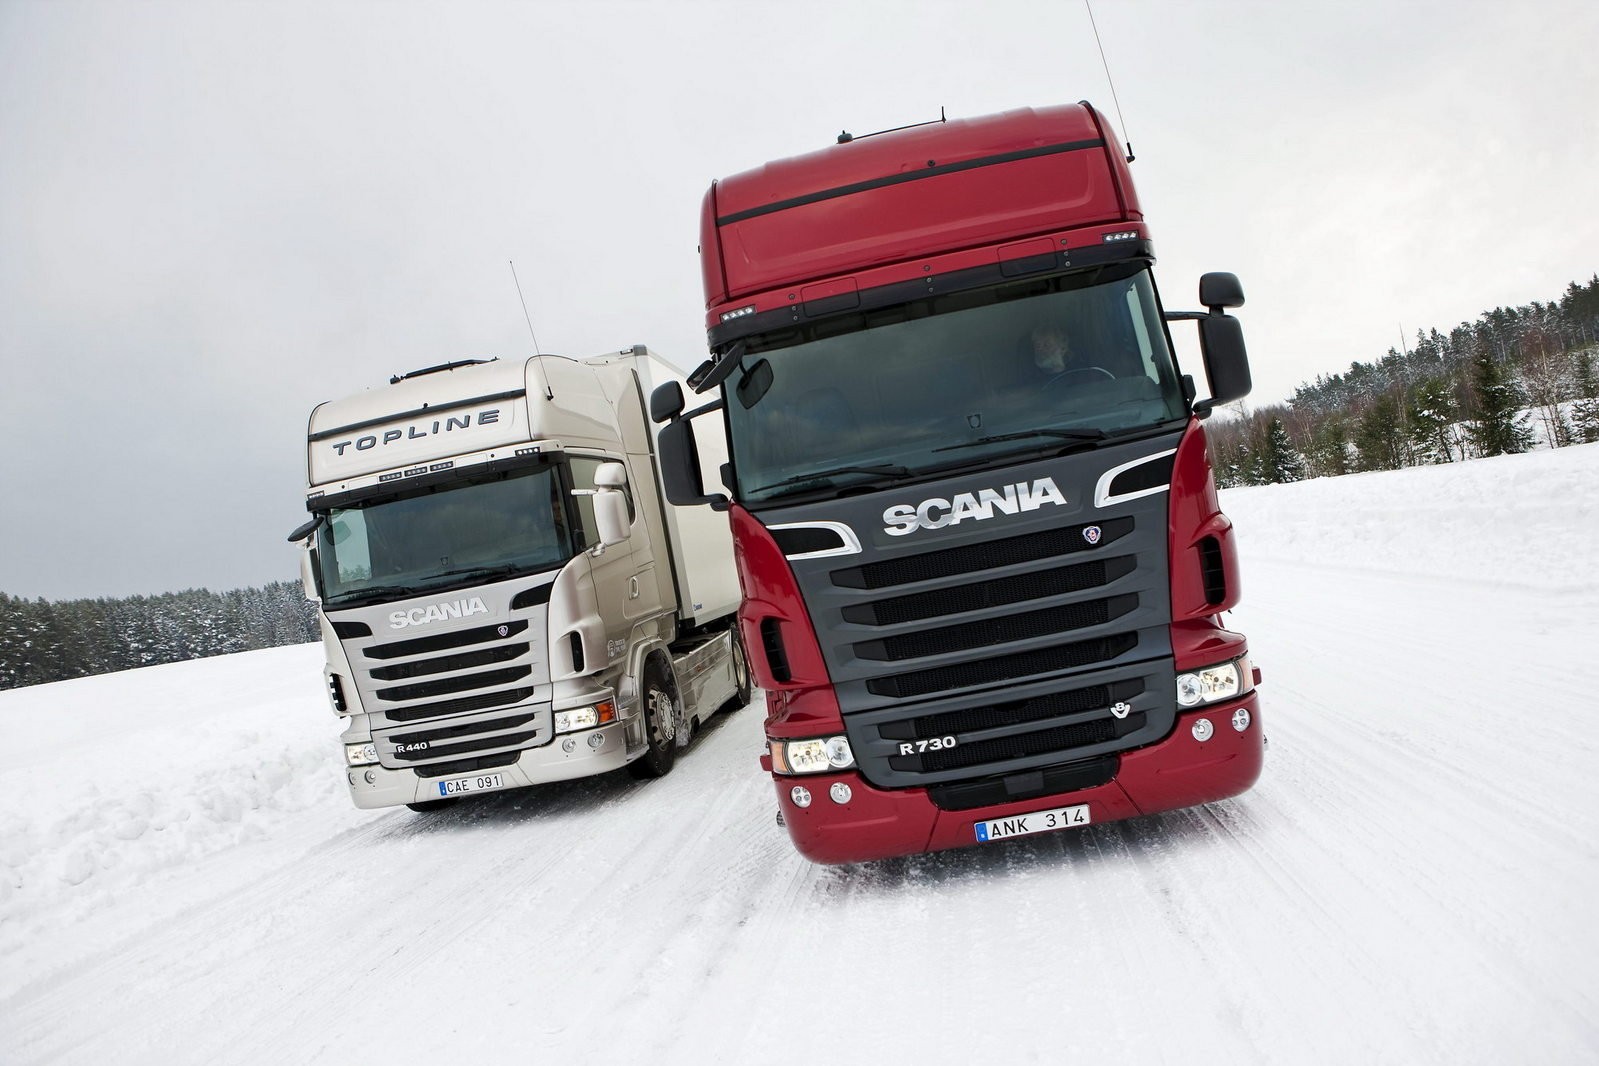 General 1599x1066 Scania truck vehicle numbers snow winter Red Truck silver truck (vehicle) cold outdoors Swedish trucks